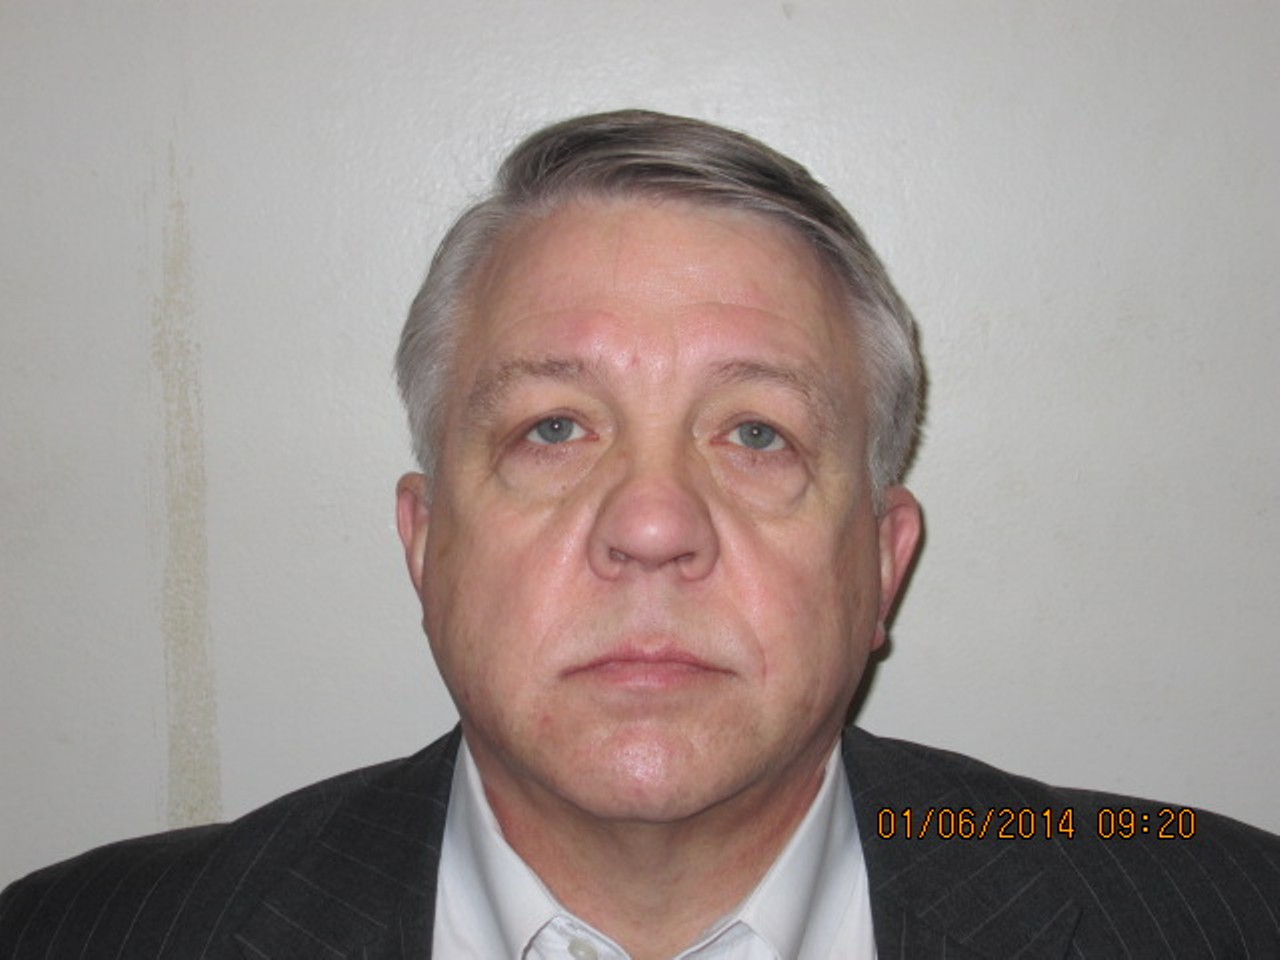 The judge's booking photo after his corruption arrest